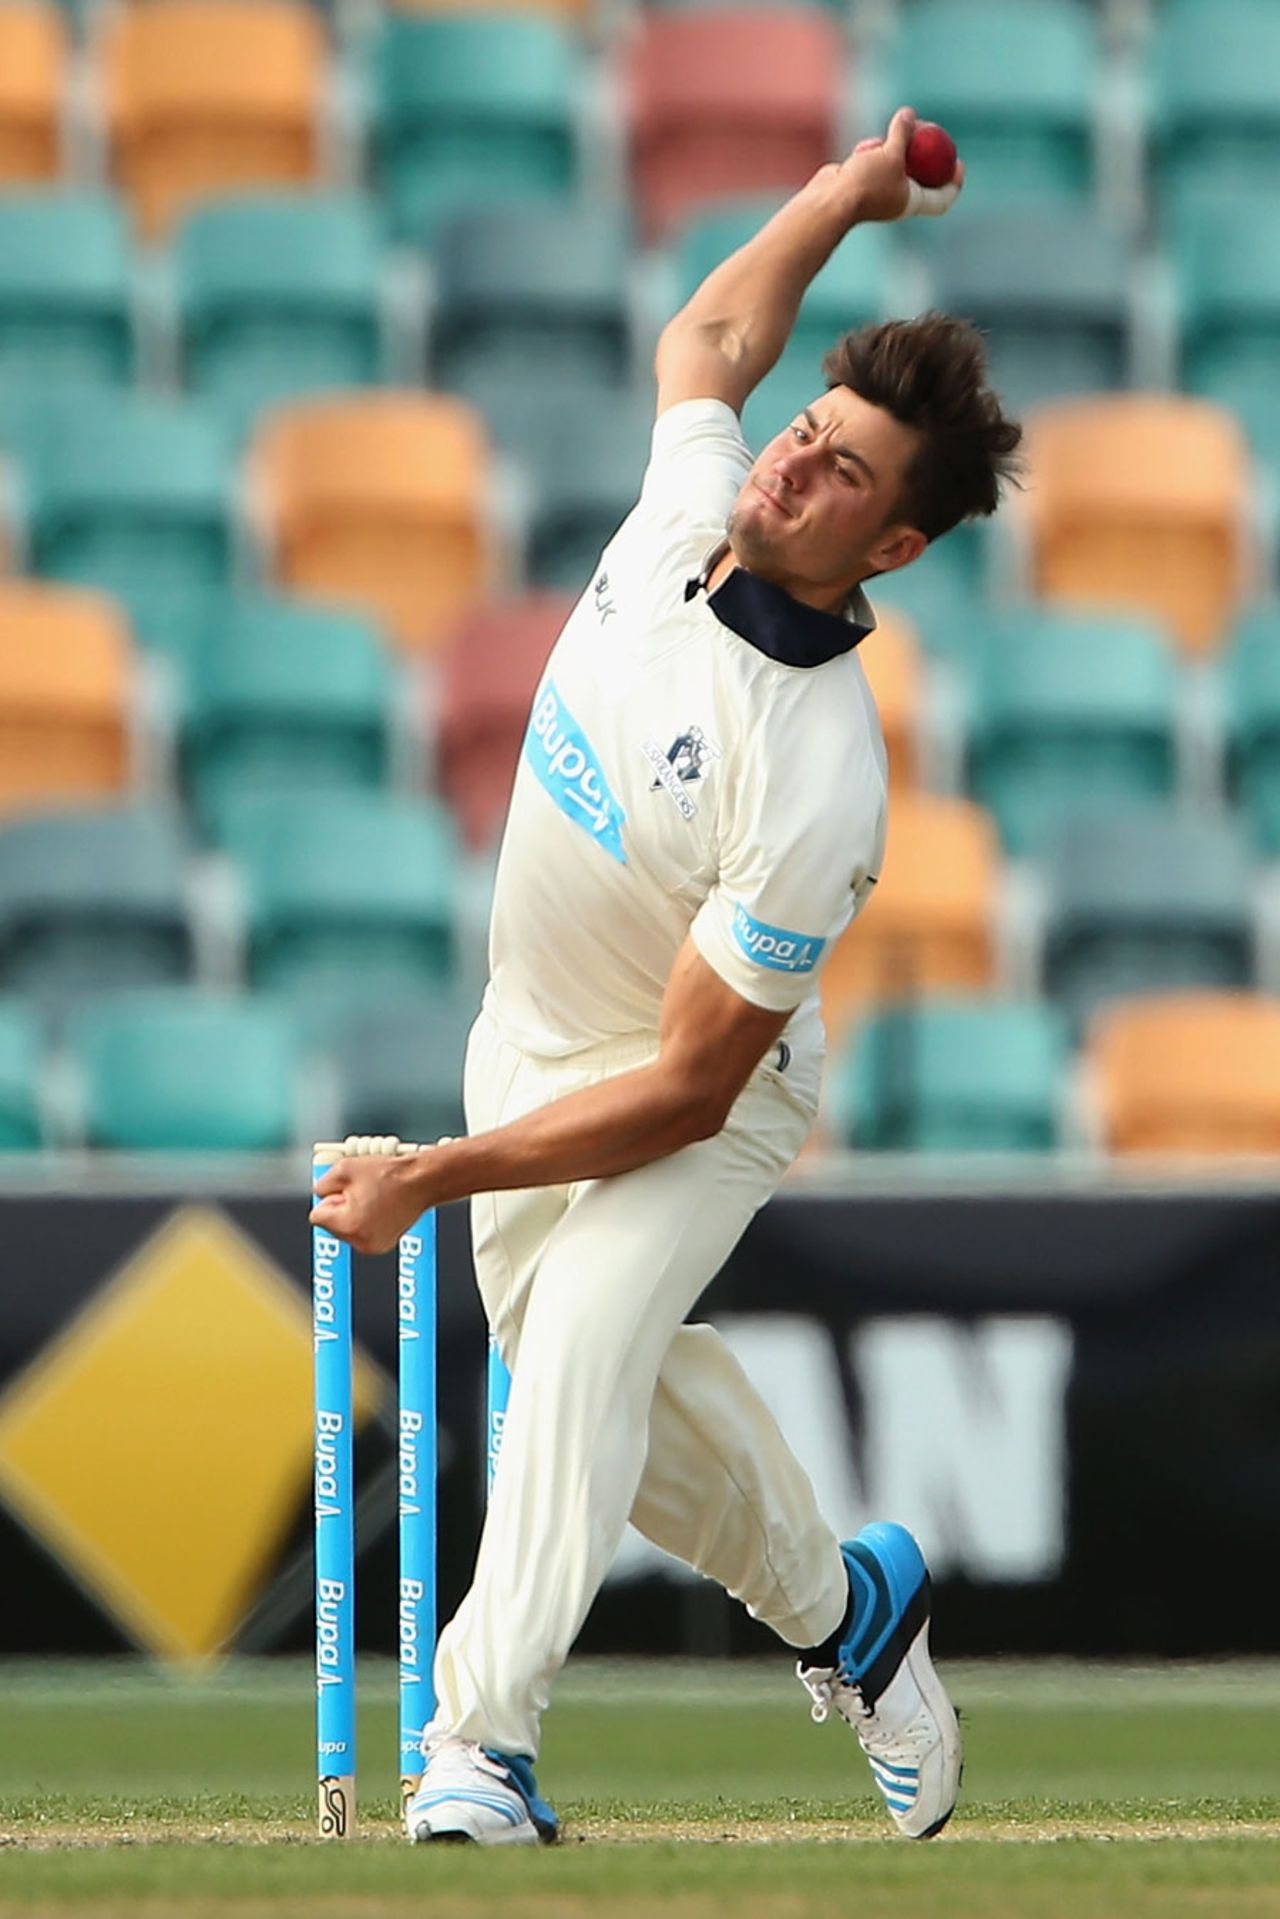 Marcus Stoinis at the bowling crease, Victoria v Western Australia, Sheffield Shield final, Hobart, March 22, 2015